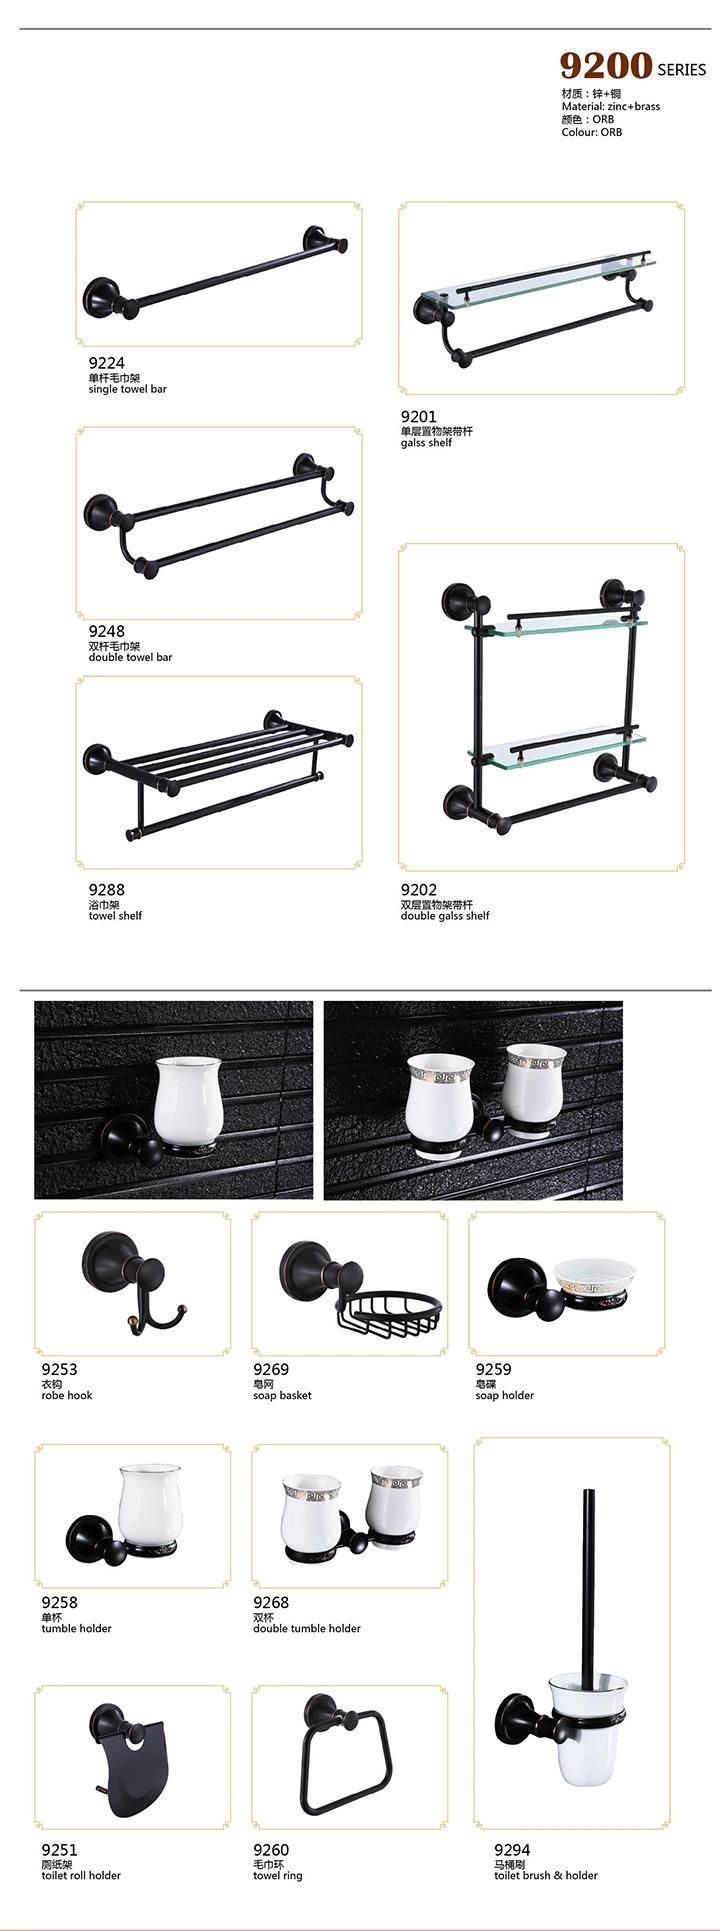 Good Quality with Best Price Cheap Bathroom Set 9500 Series